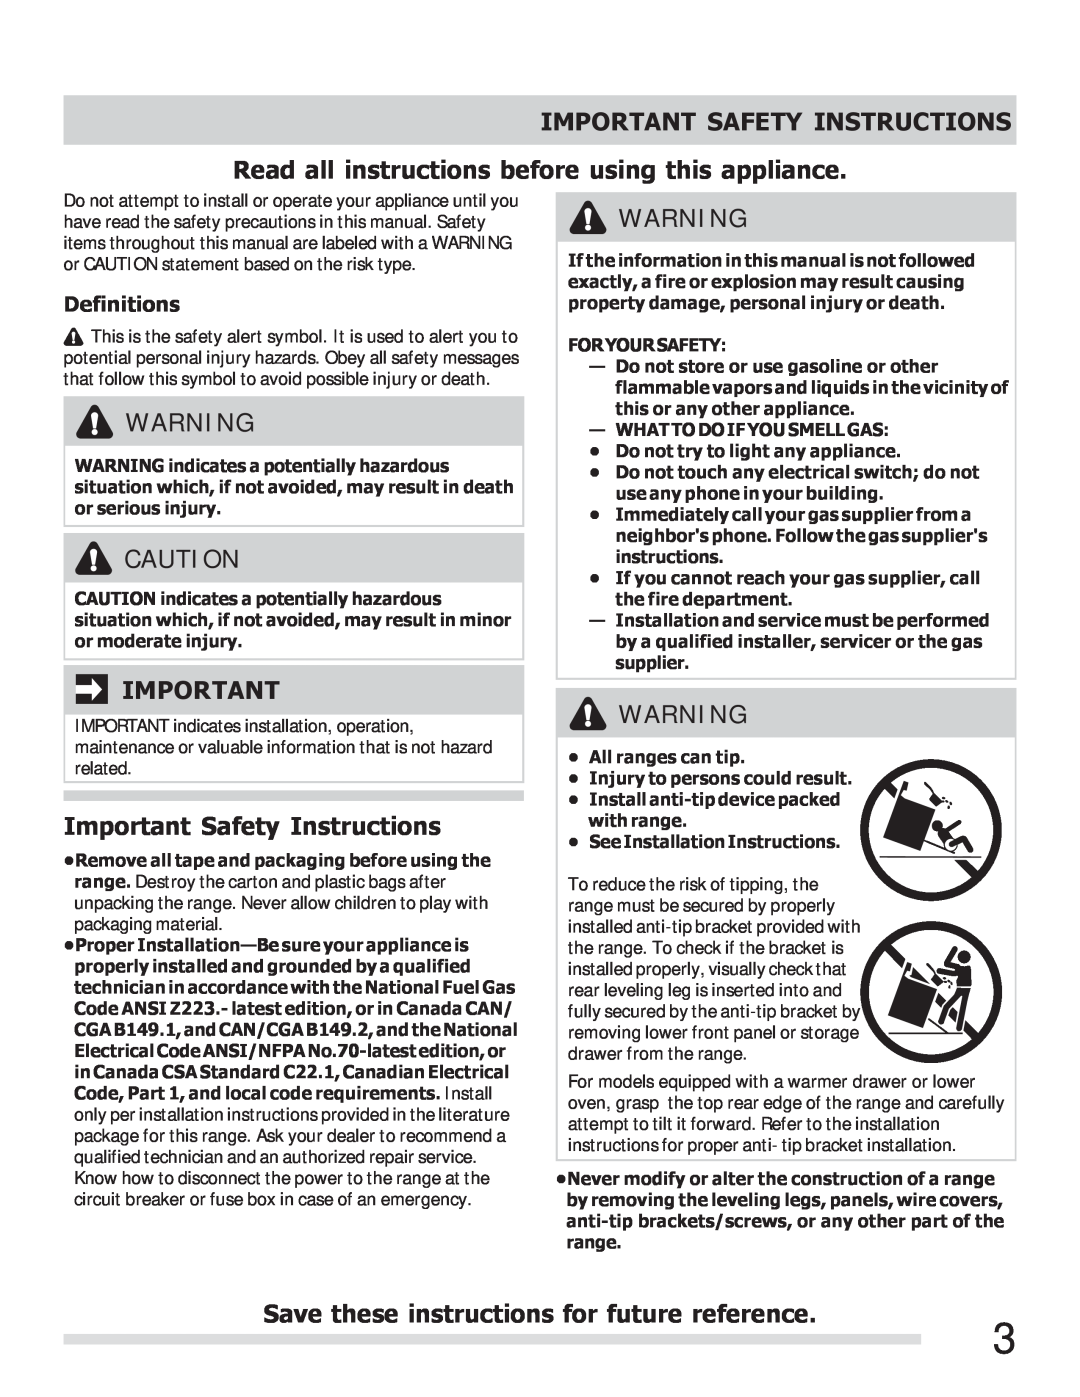 Frigidaire FFGF3023LW Important Safety Instructions, Read all instructions before using this appliance, Definitions 